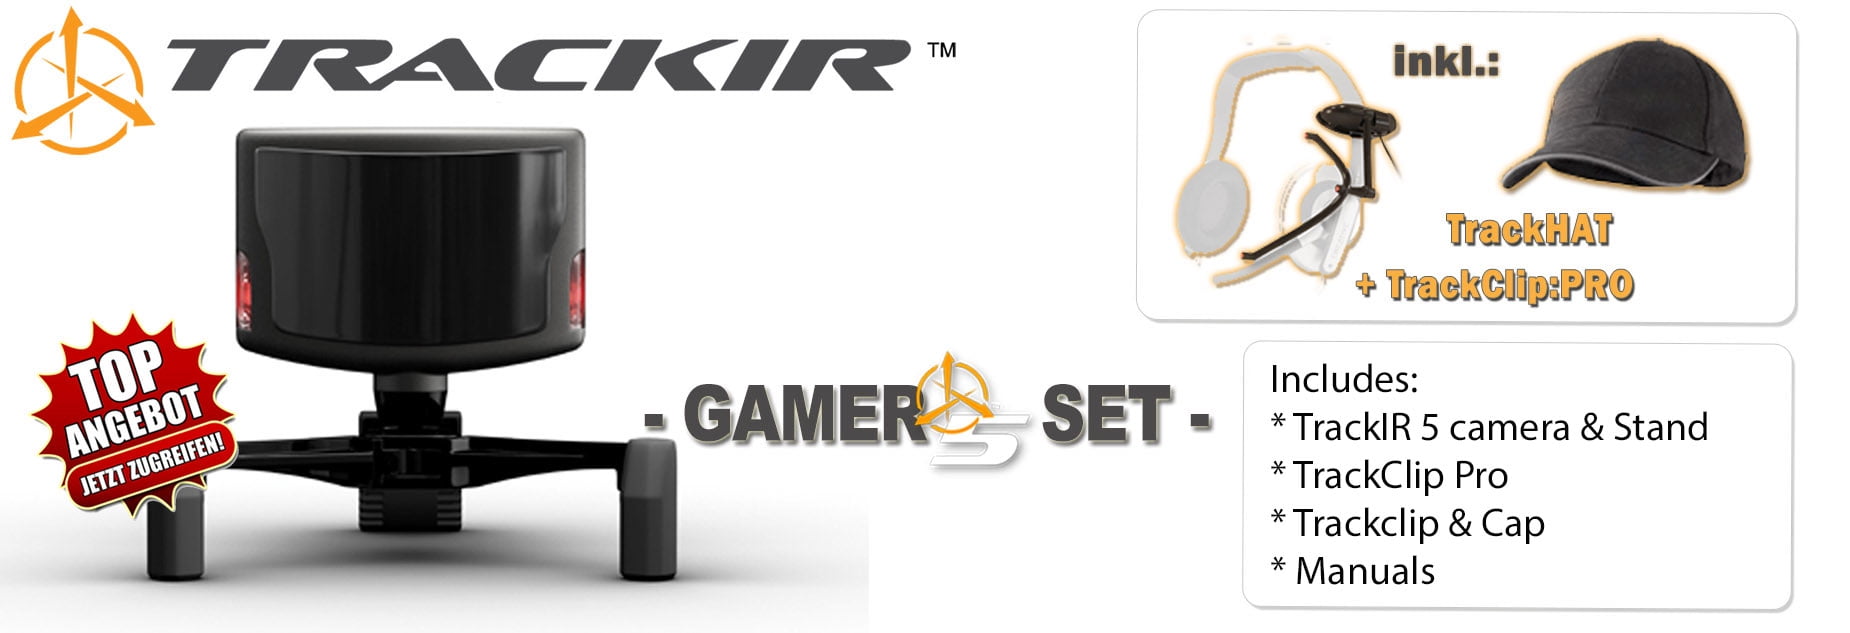 TrackIR 5 Head Tracking Bundle (Wireless and Wired) - video gaming - by  owner - electronics media sale - craigslist